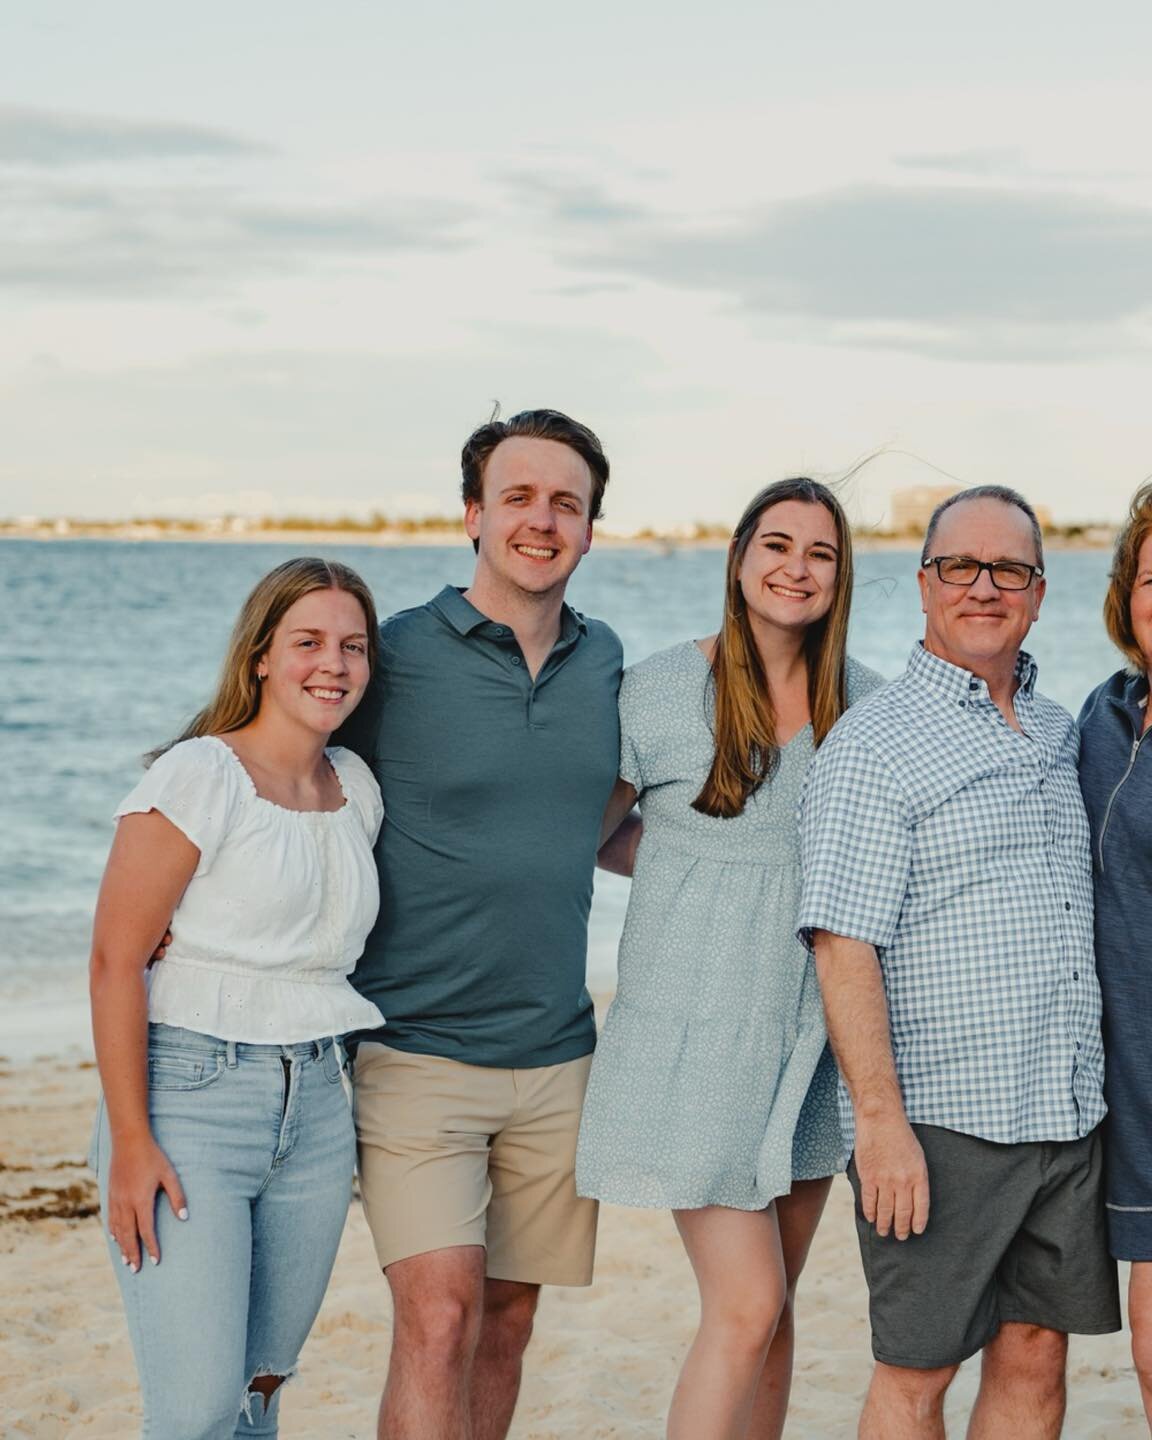 Family photos on the beach! Been a little busy but finally got around to posting these. I am forever grateful for my family. The Thurman clan always knows how to have a good time. I'm a very lucky guy.

 #photography #potd #photooftheday #photo #trav